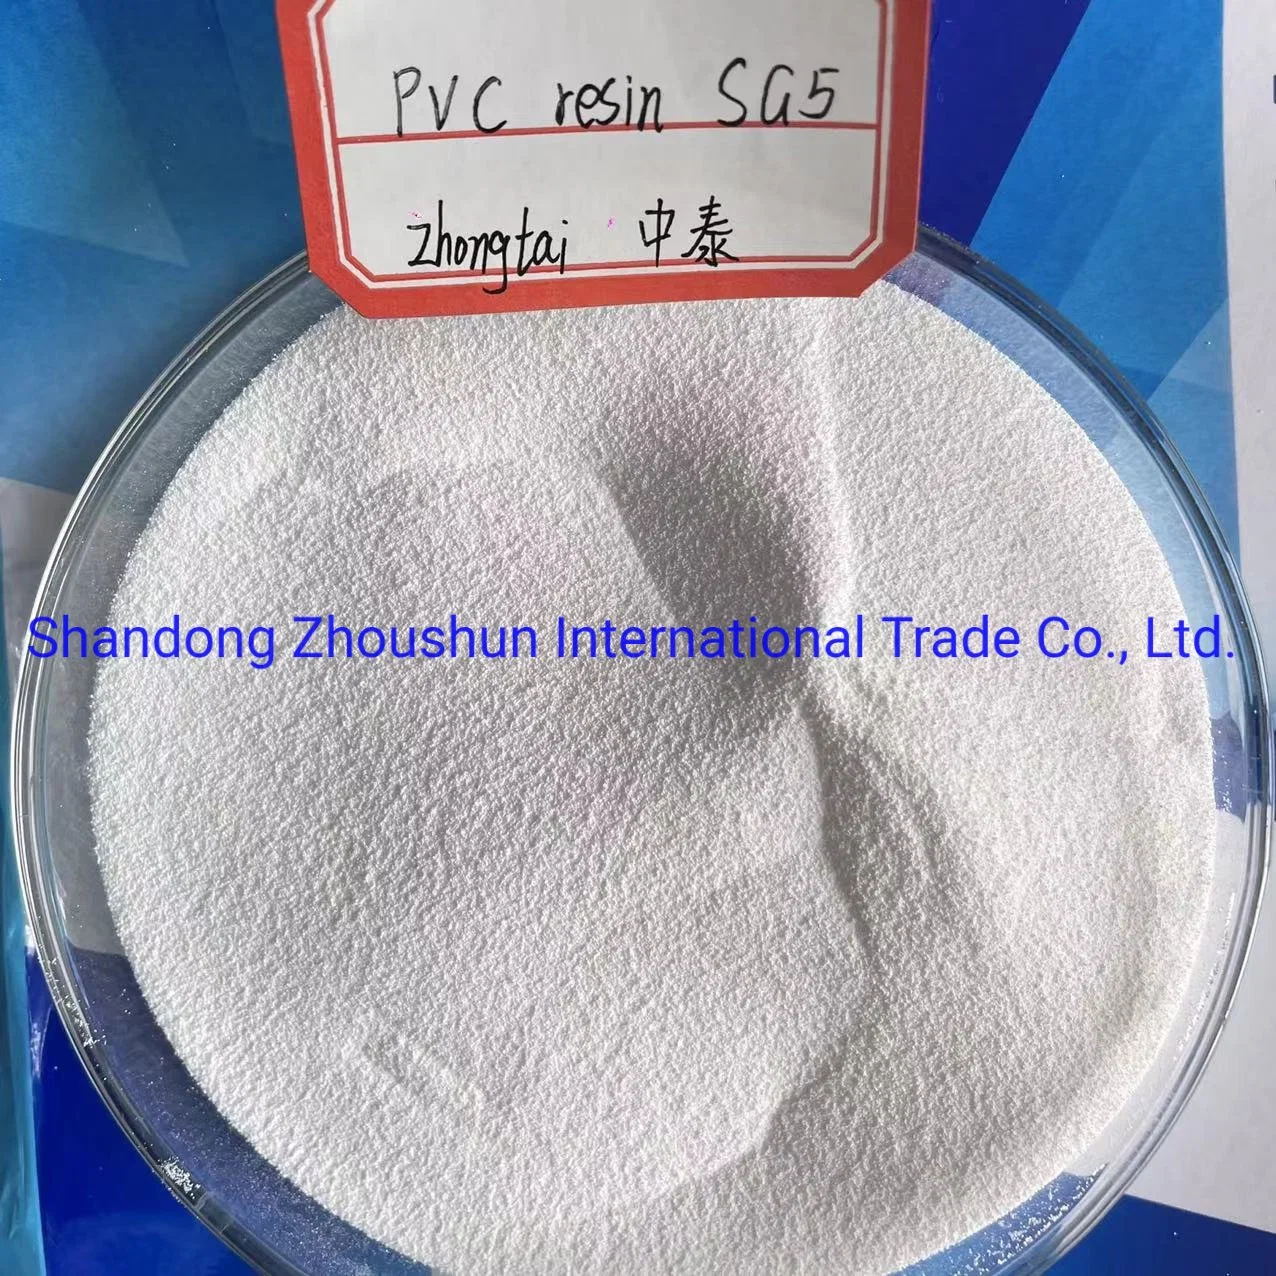 2022 Industrial Grade PVC Resin Sg5 Polyvinyl Chloride Powder for Pipe Production